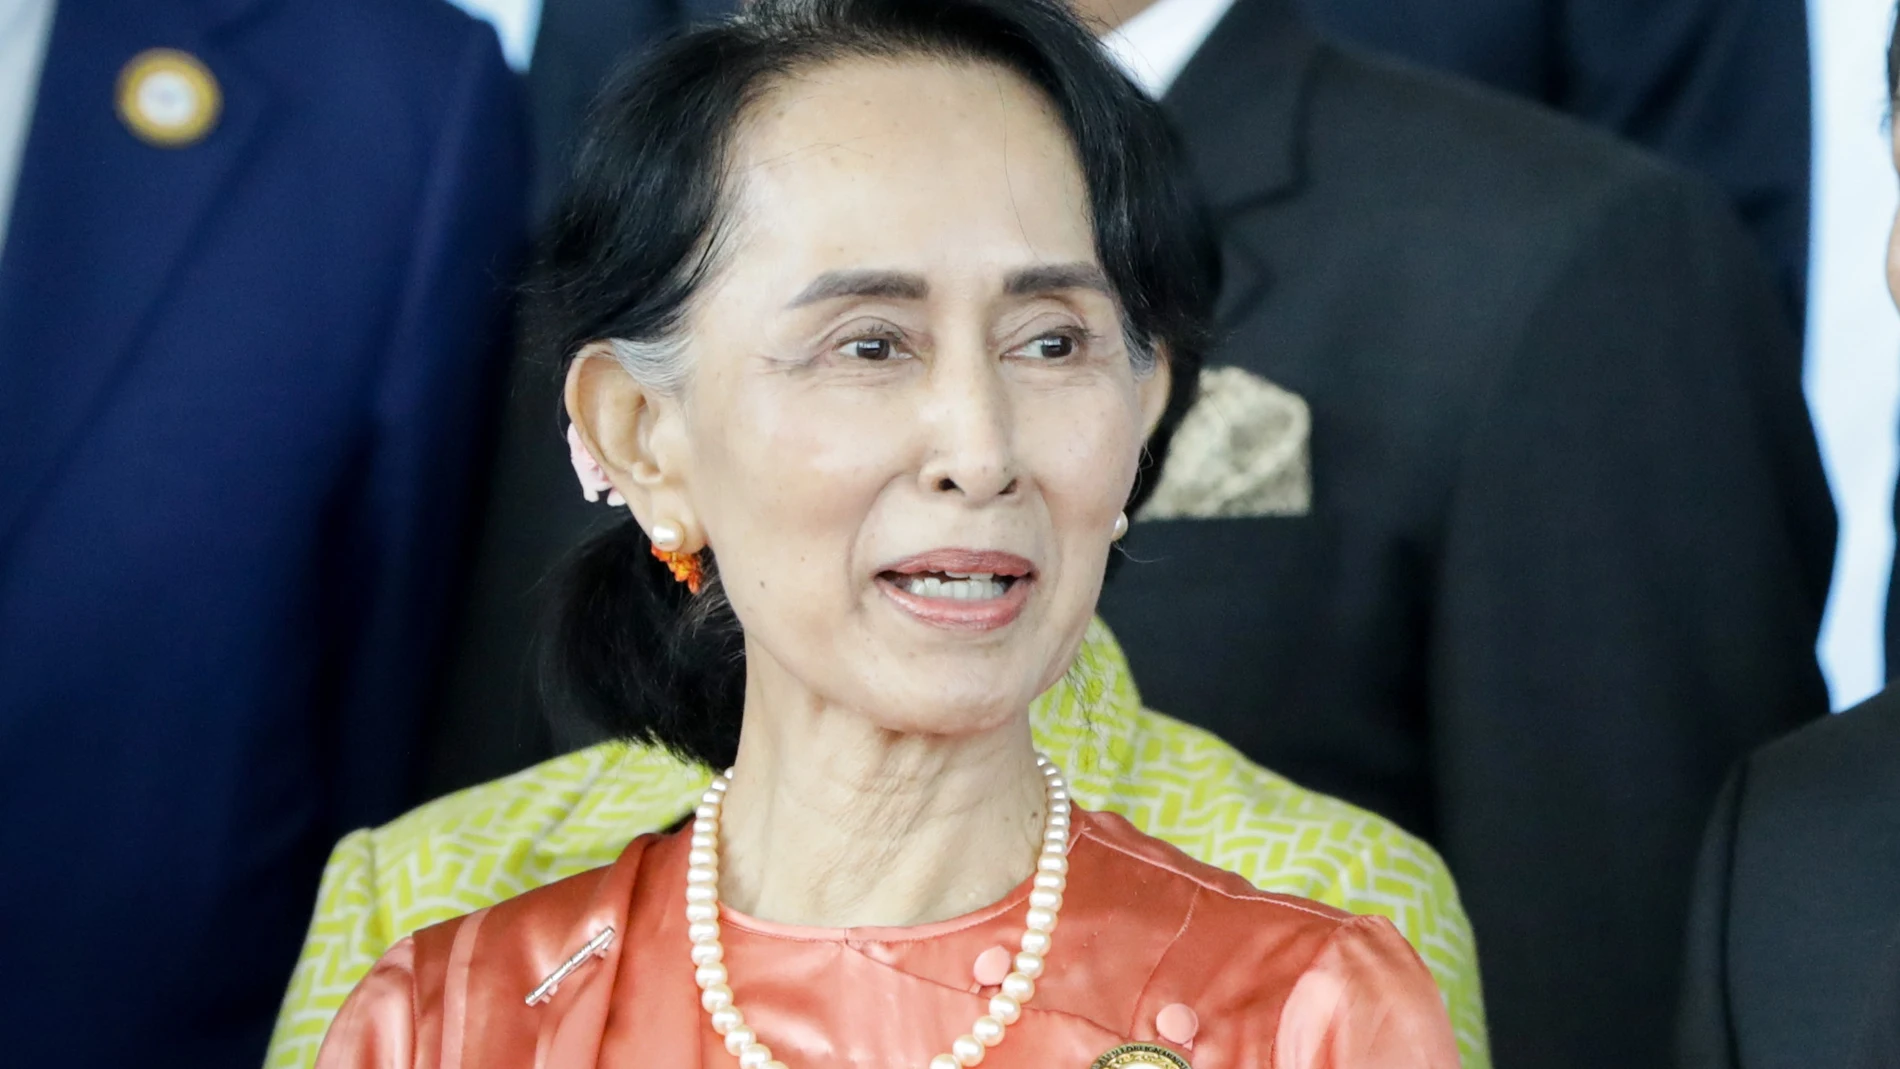 FILED - 20 November 2017, Myanmar, Naypyidaw: State Counsellor of Myanmar Aung San Suu Kyi attends the 13th Asia-Europe Meeting. Myanmar's detained leader Aung San Suu Kyi, who was arrested during a coup on Monday, has released a statement urging the country's people to oppose the military's power grab, her party has said. Photo: Kay Nietfeld/dpa (Foto de ARCHIVO)20/11/2017 ONLY FOR USE IN SPAIN